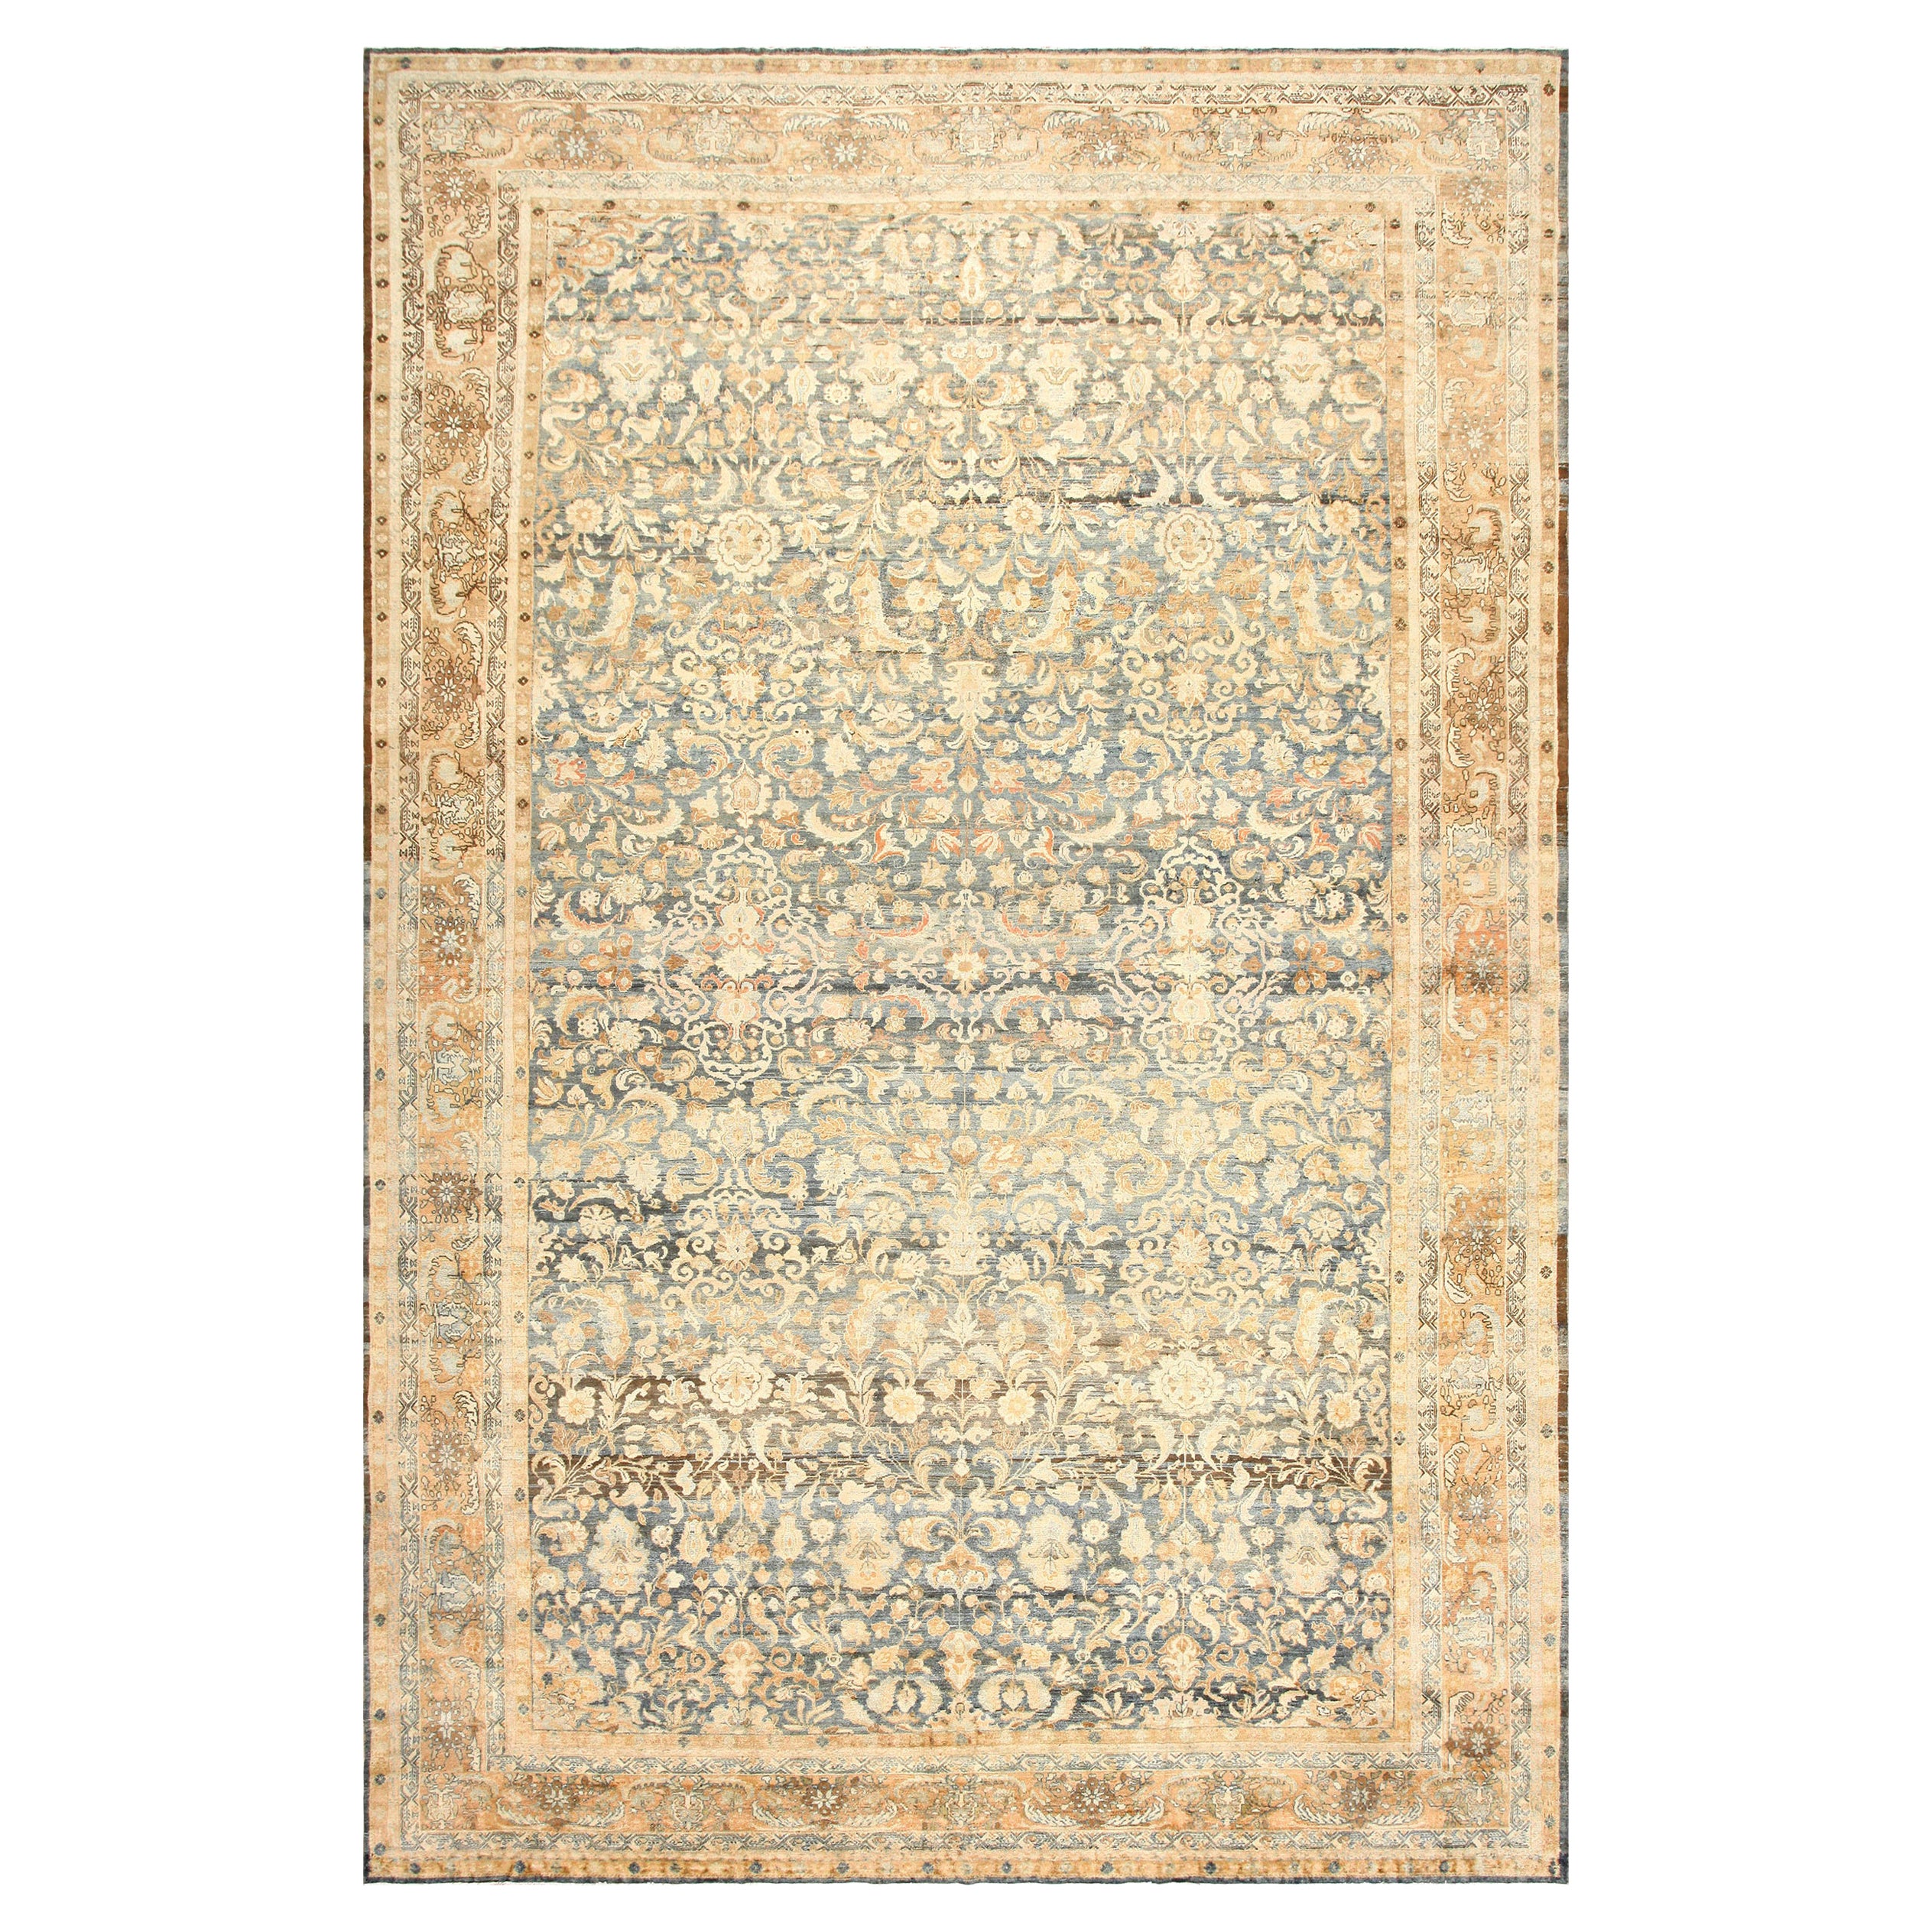 Antique Persian Malayer Rug. Size: 12 ft x 18 ft For Sale